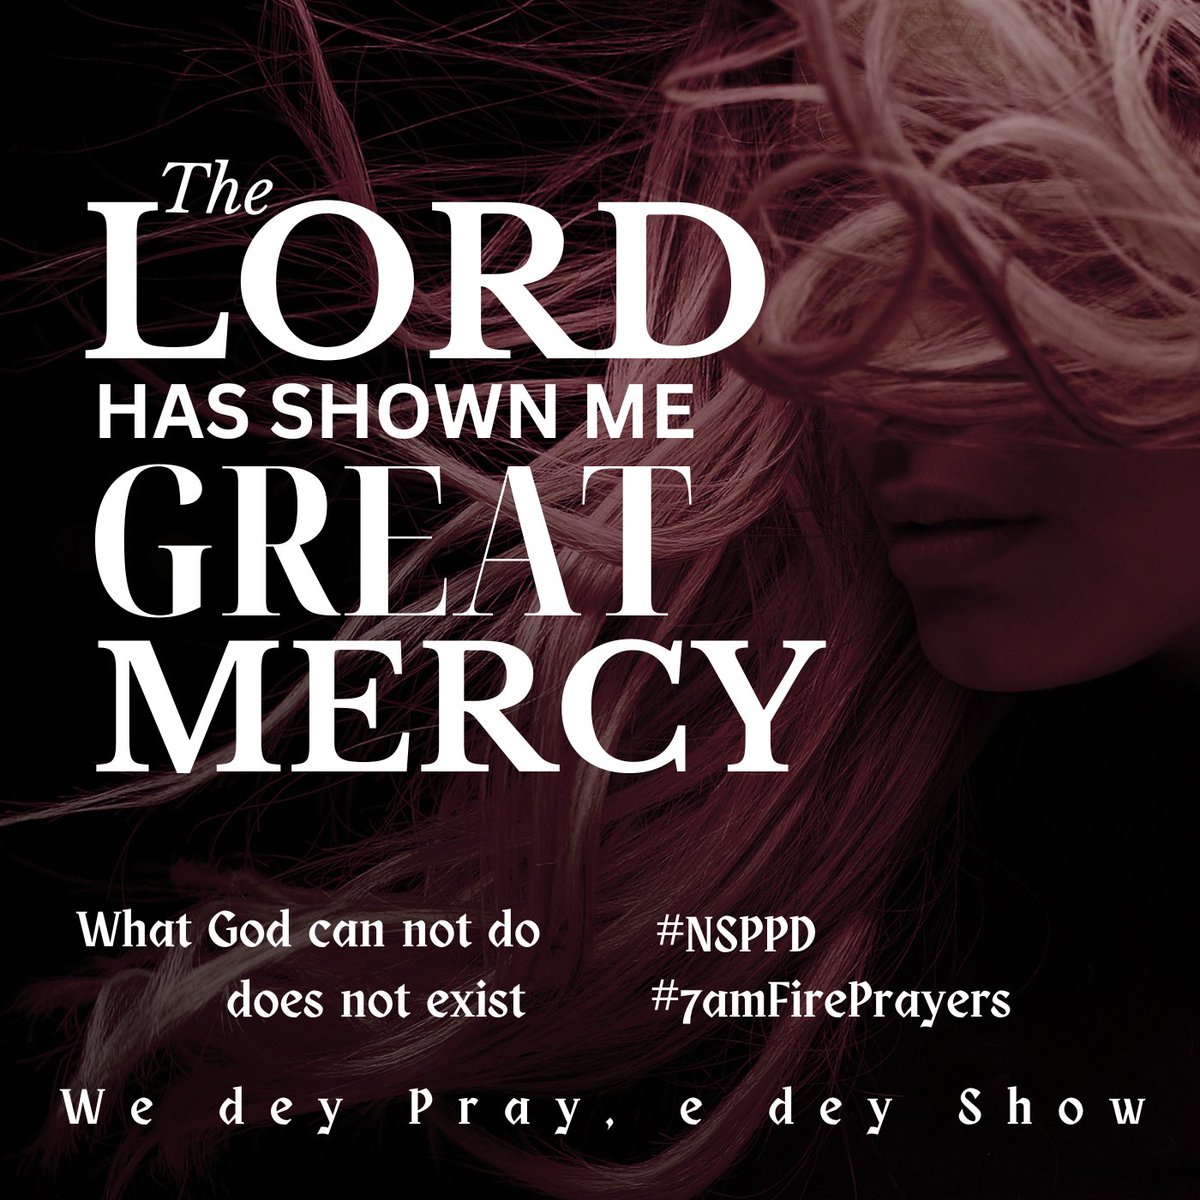 The 👀
Lord 👀
Has 👀
Shown Me 👀
Great 👀
Mercy 👀

What God Can Not Do Does Not Exist! 🌍♥️

#NSPPD 🙏🏾♥️
#7amFirePrayers 🔥♥️
@RealJerryEze 🌍 ♥️
#WeLoveYouPastorJerry 🫶🏾♥️
#ObrigadoPastorJerry 🙌🏾♥️